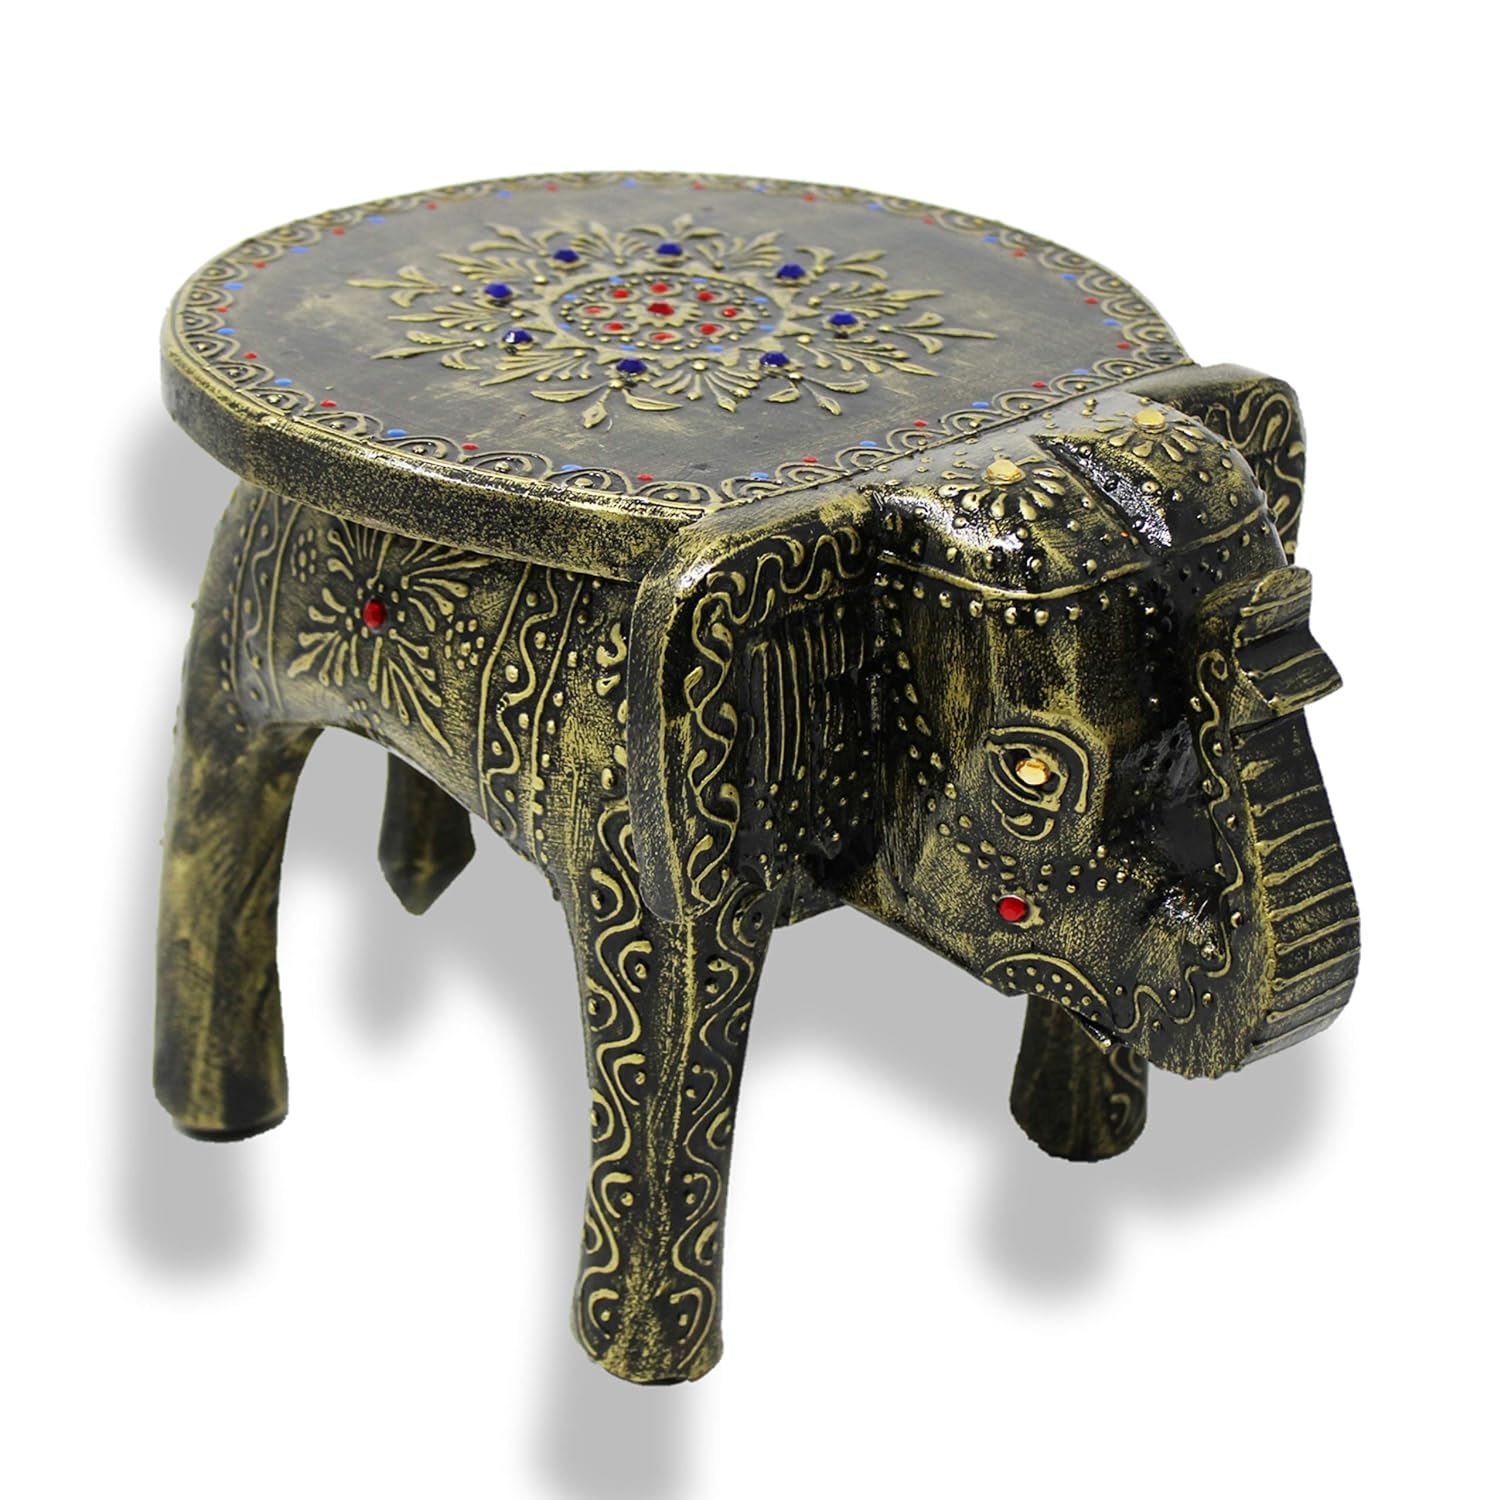 Hand-Painted Colorful Wooden Elephant Stool (Antique Finish)